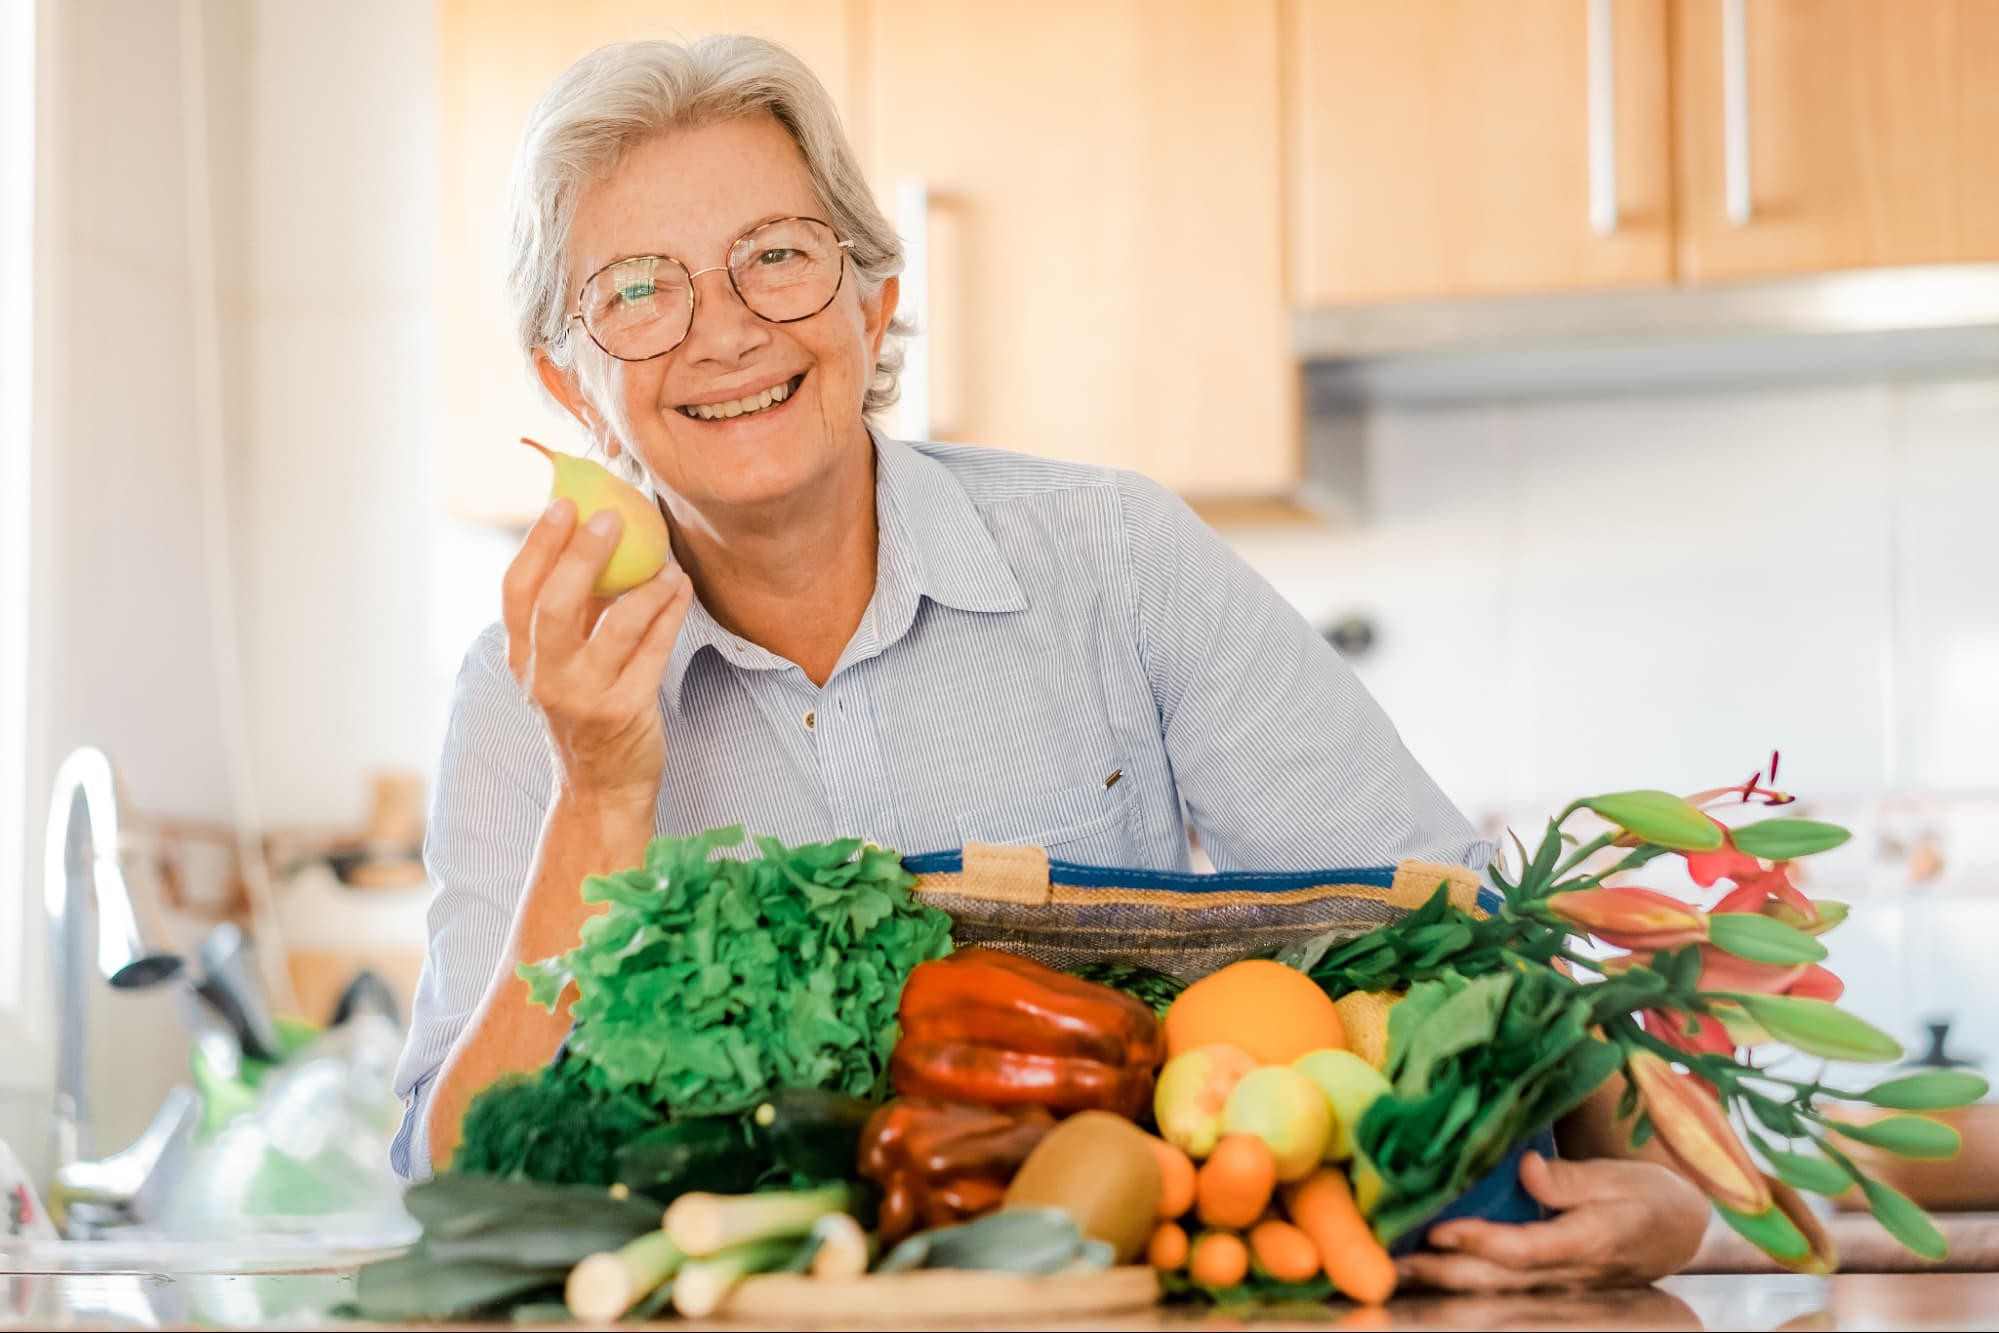 Healthy Habits Every Aging Adult Should Adopt in Their 70's